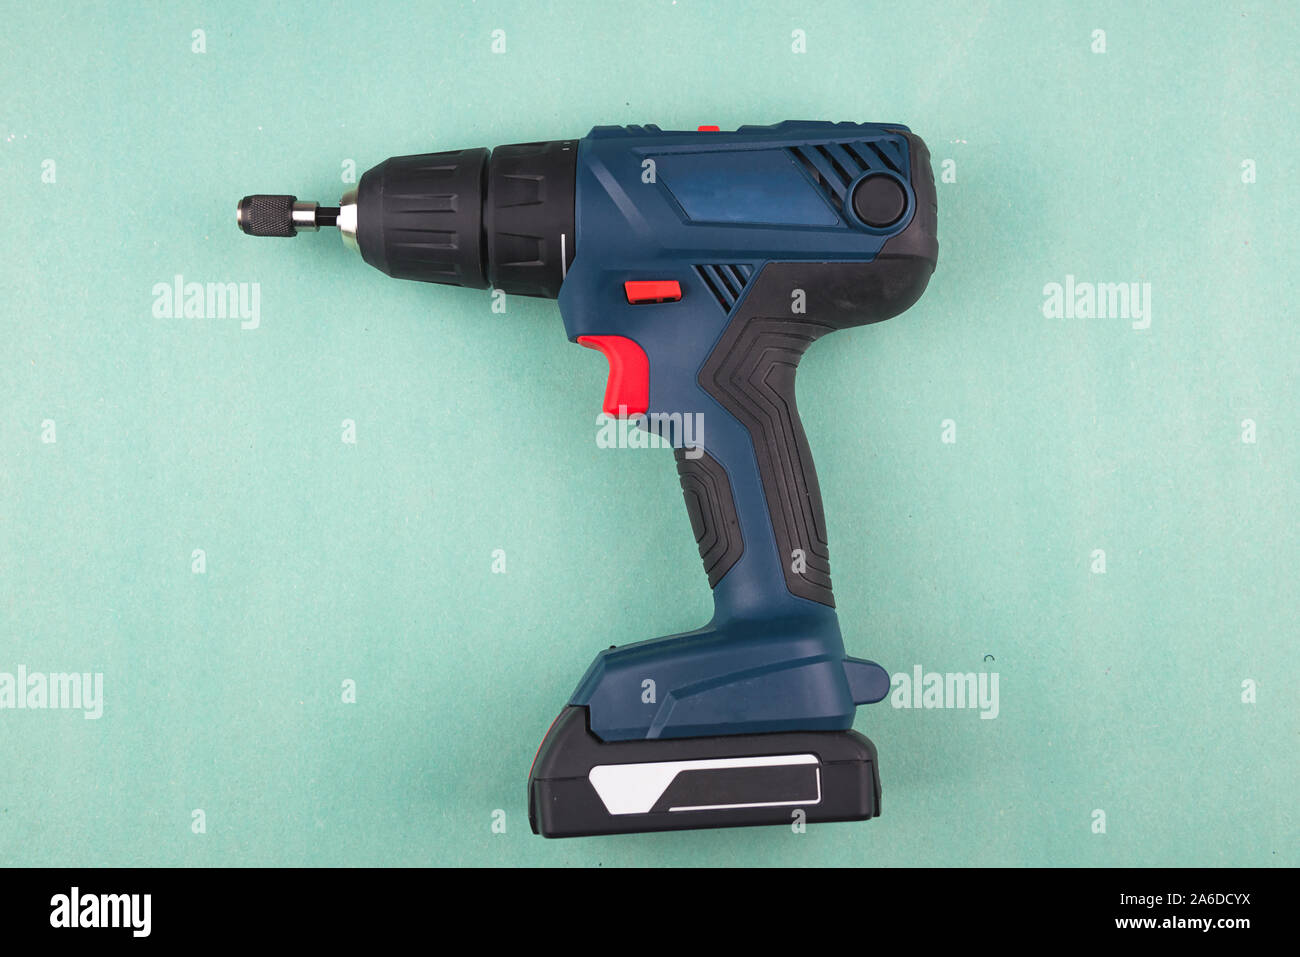 Blue screwdriver power tool on blue paper background. Suitable for any purprose use. Stock Photo